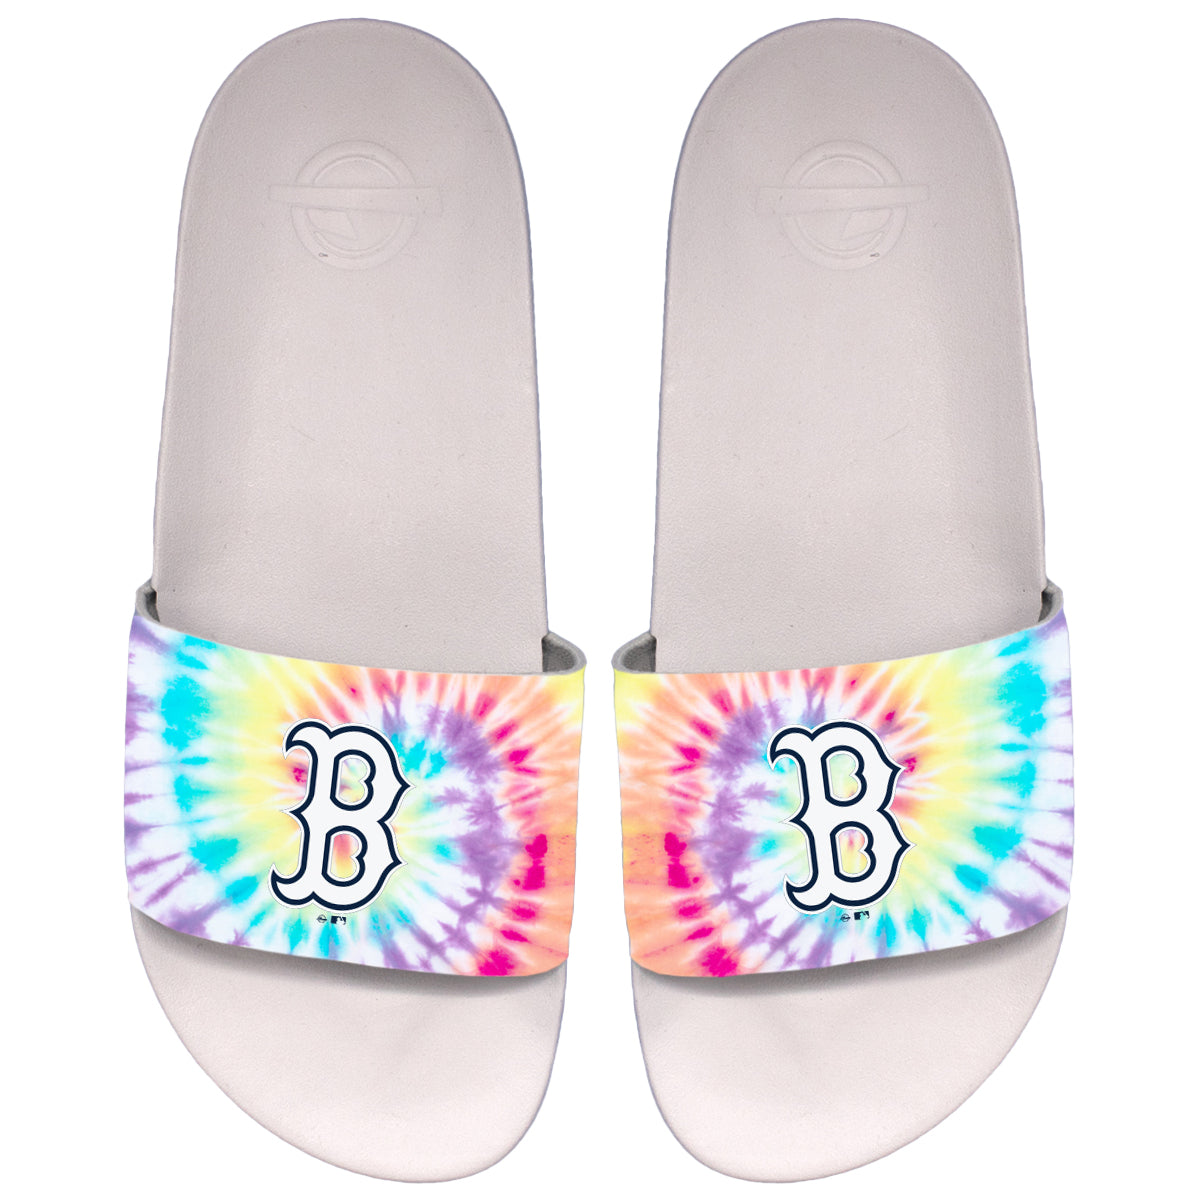 Red Sox Tie Dye Motto Slides